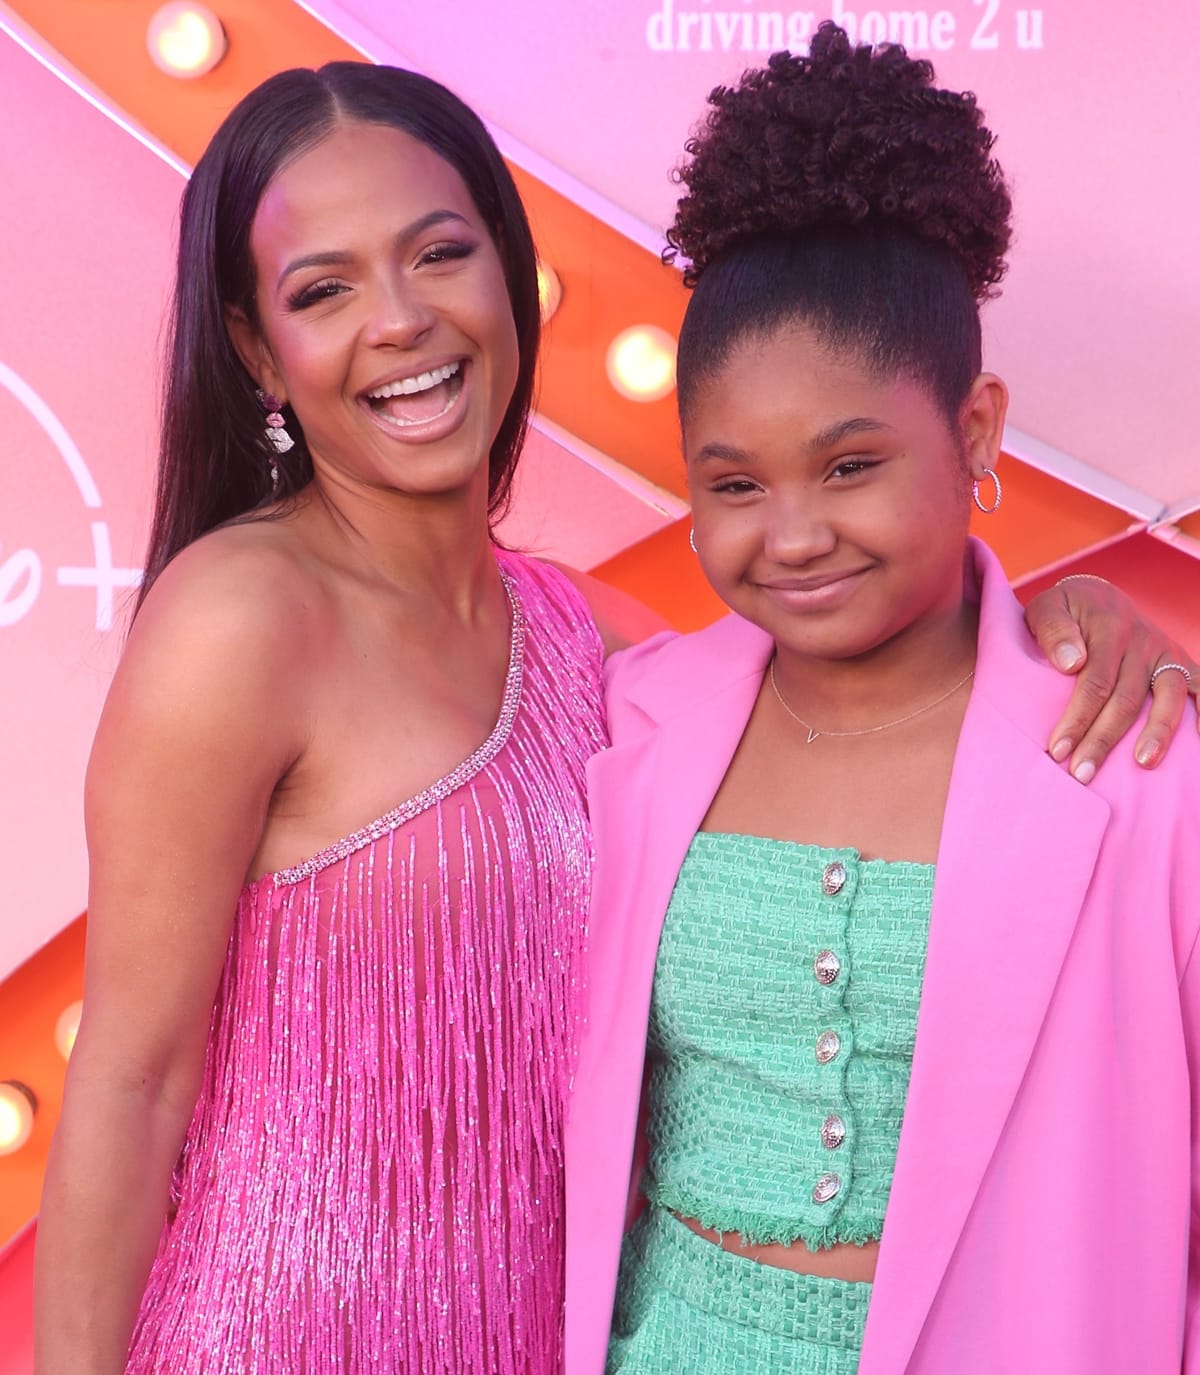 Christina Milian and her daughter Violet Madison Nash, whom she shares with her ex-husband Terius Youngdell Nash, better known by his stage name The-Dream